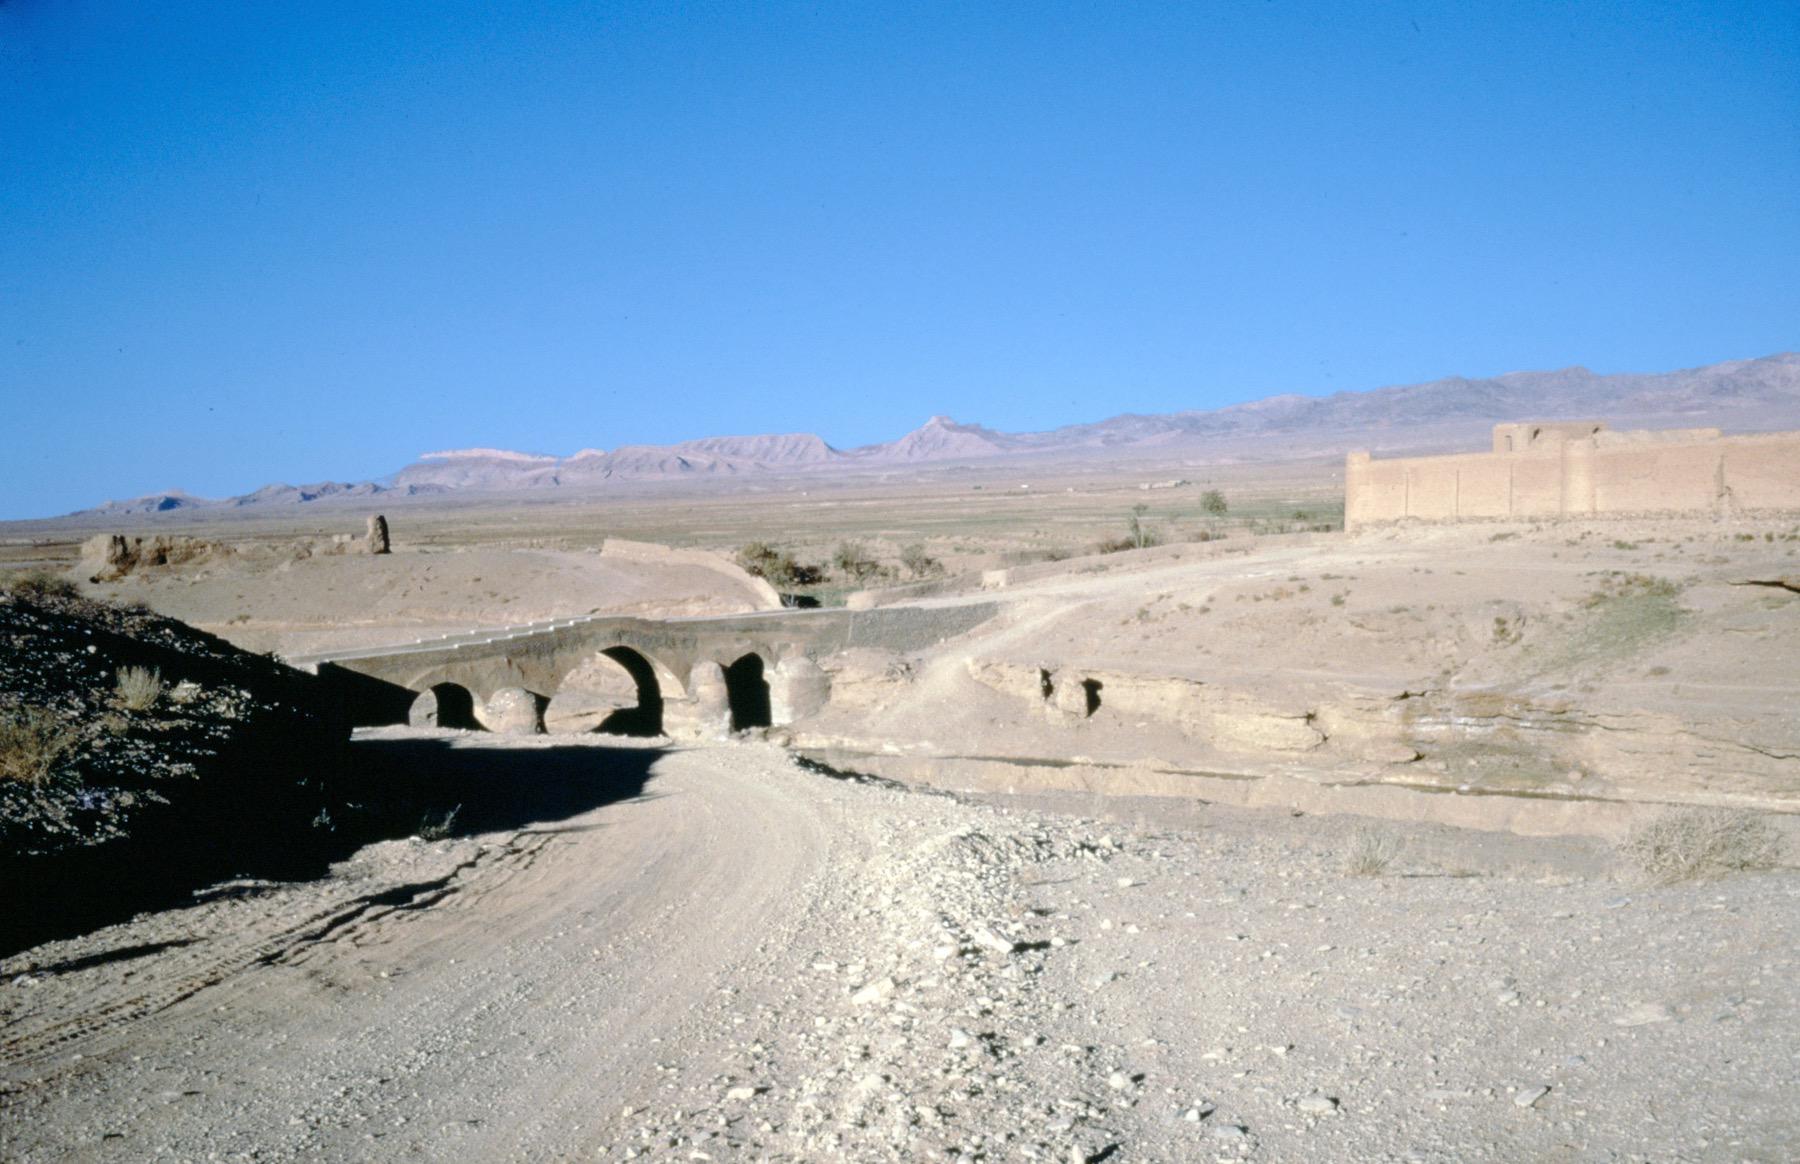 General view with bridge at center and caravanserai at right